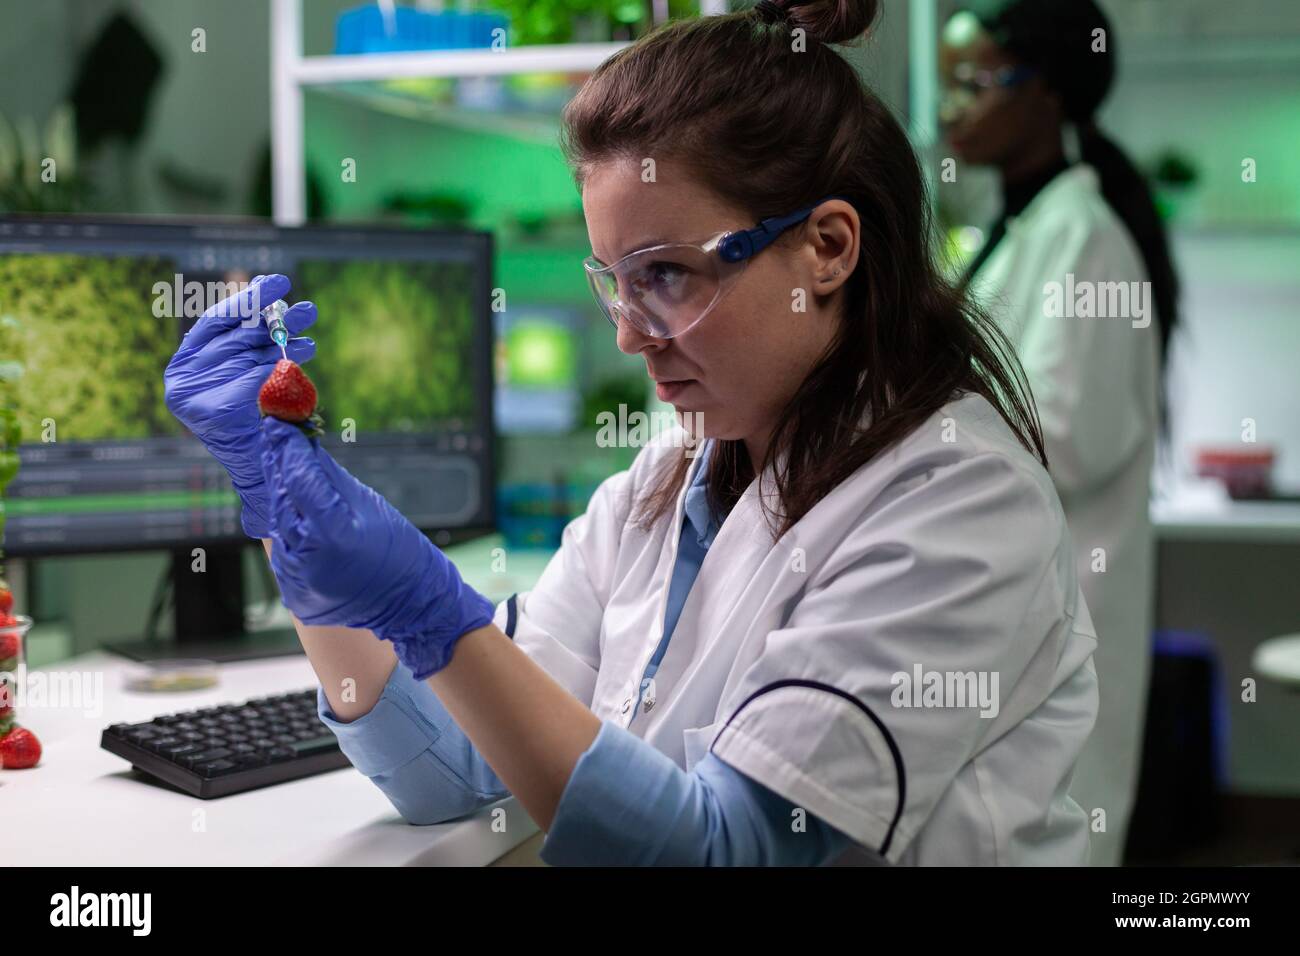 Biologist researcher specialist injecting strawberry with chemical pesticides liquid working at genetically modified fruits experiment. Chemist scientist doctor analyzing gmo fruit in laboratory Stock Photo